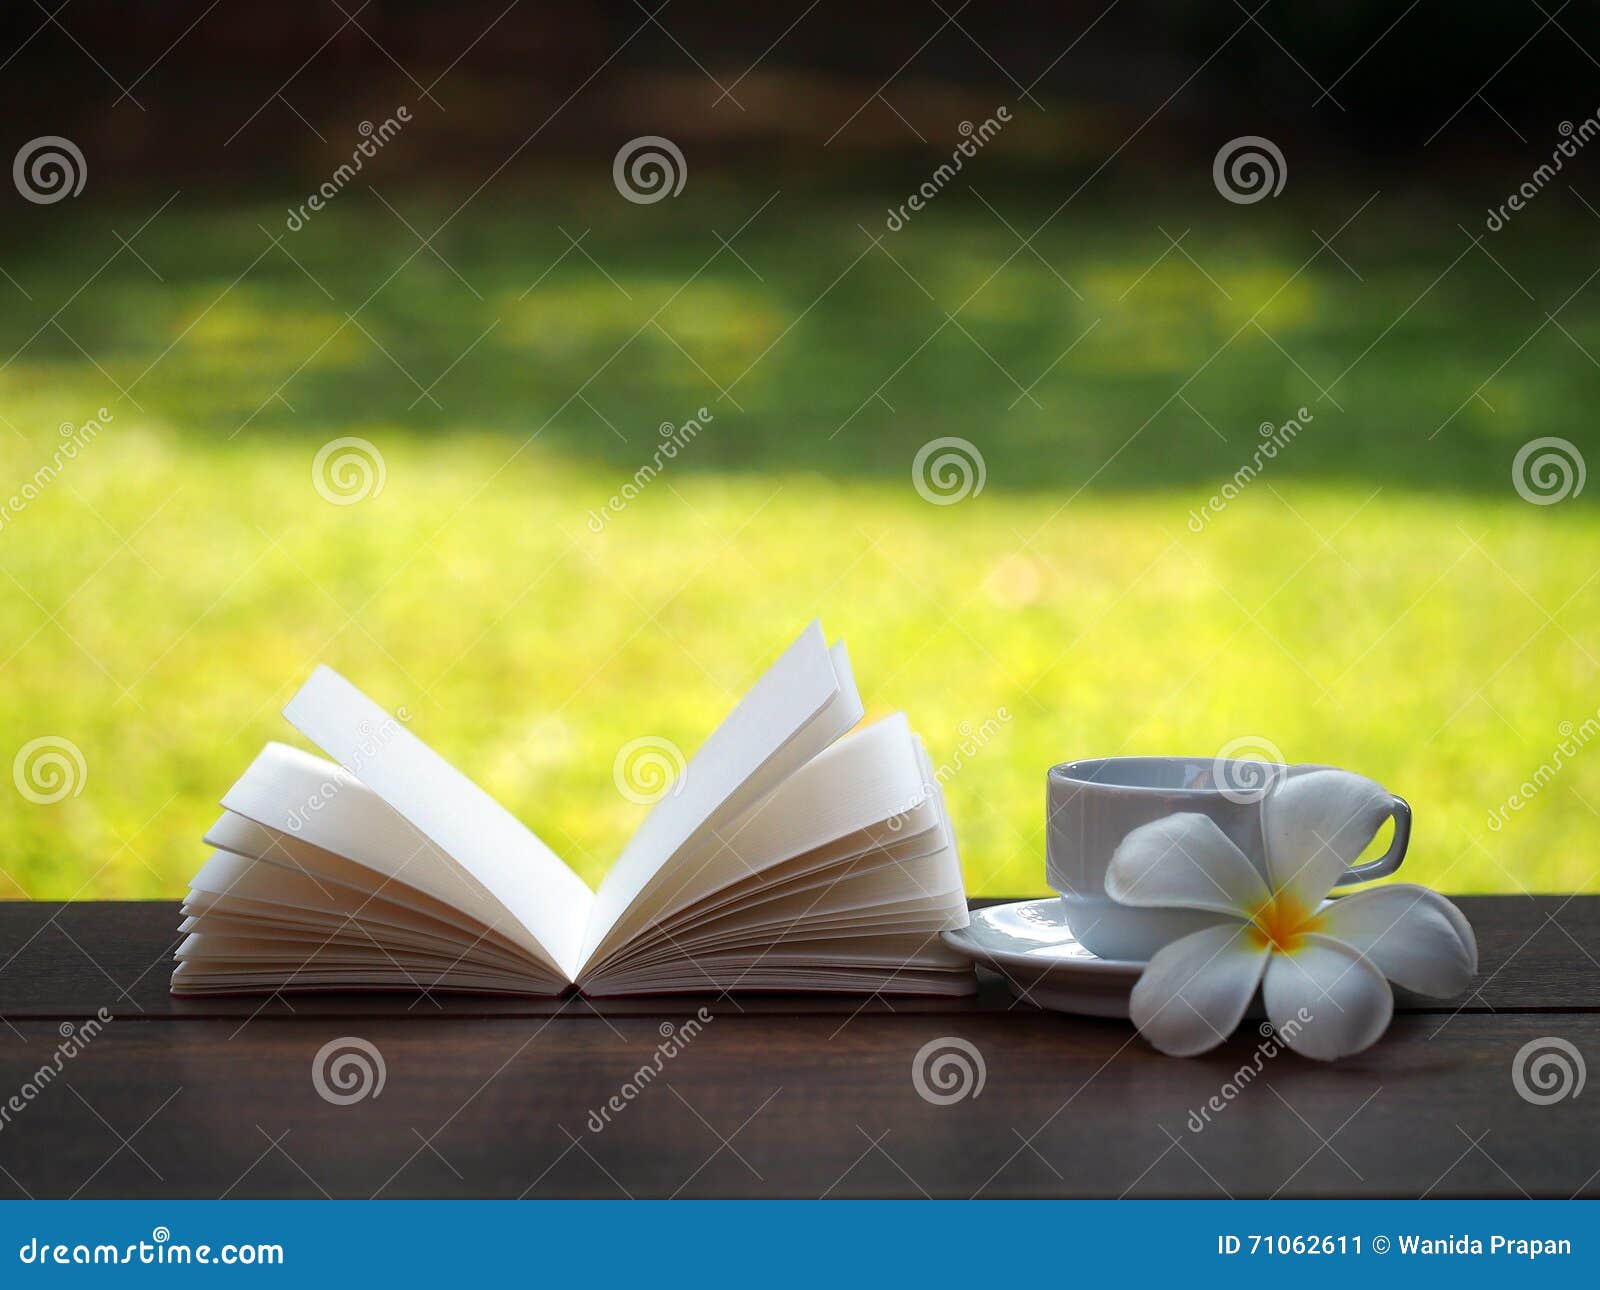 coffee cup and open book with flower on wooden table ,soft focus